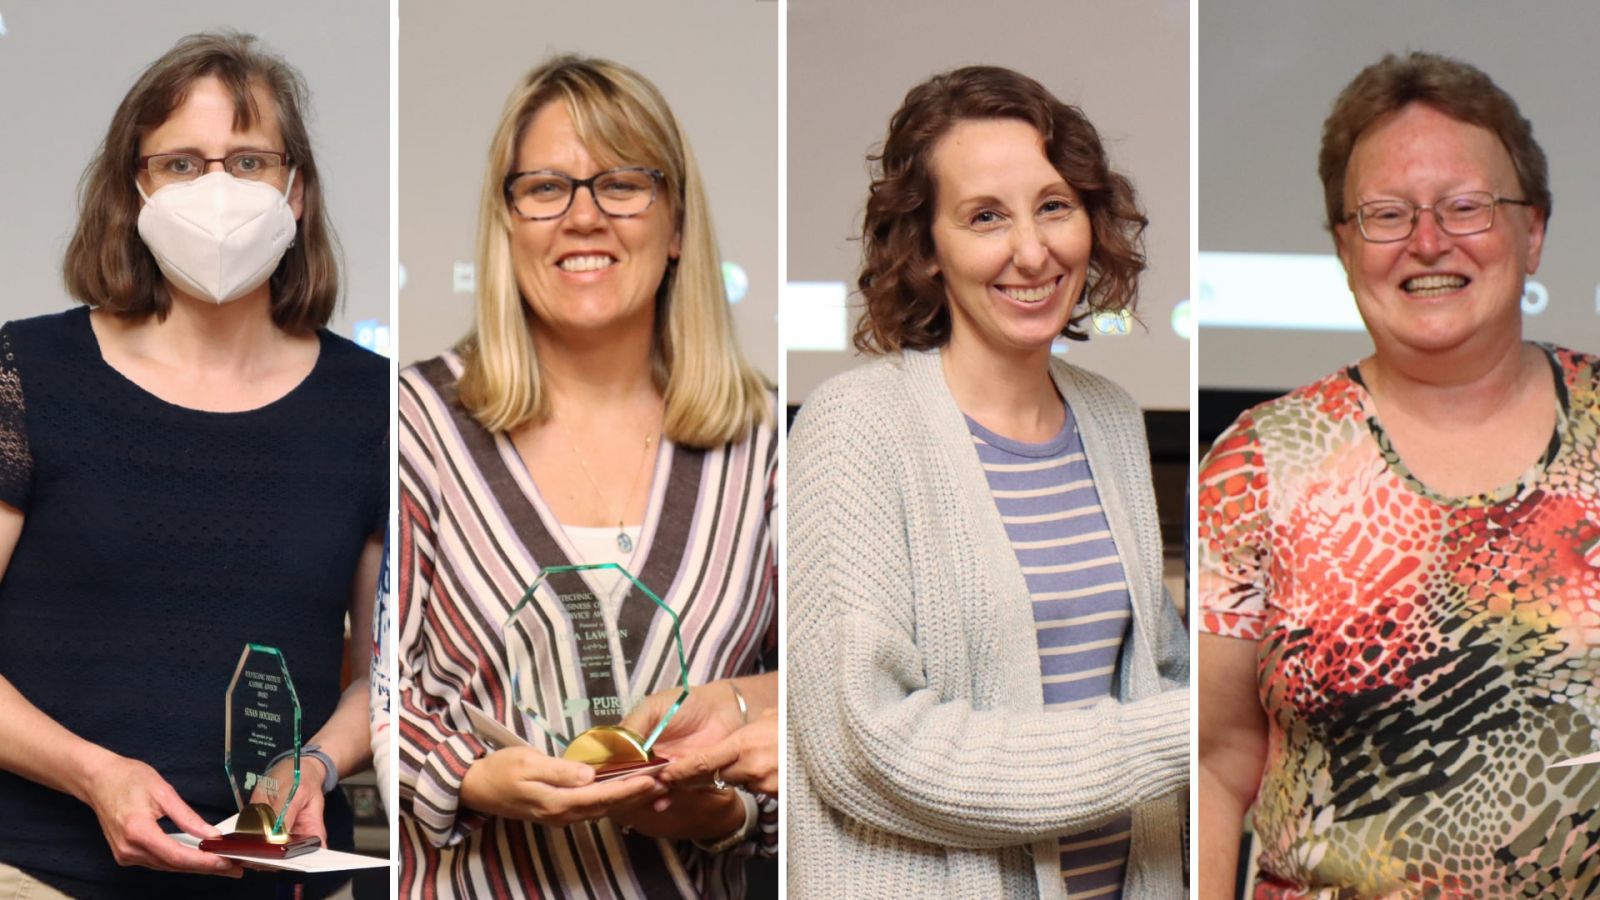 Susan Hockings, Lisa Lawson, Sarah Prater and Brenda Sheets were among Purdue Polytechnic staff who received awards for their work during the 2021-2022 academic year.